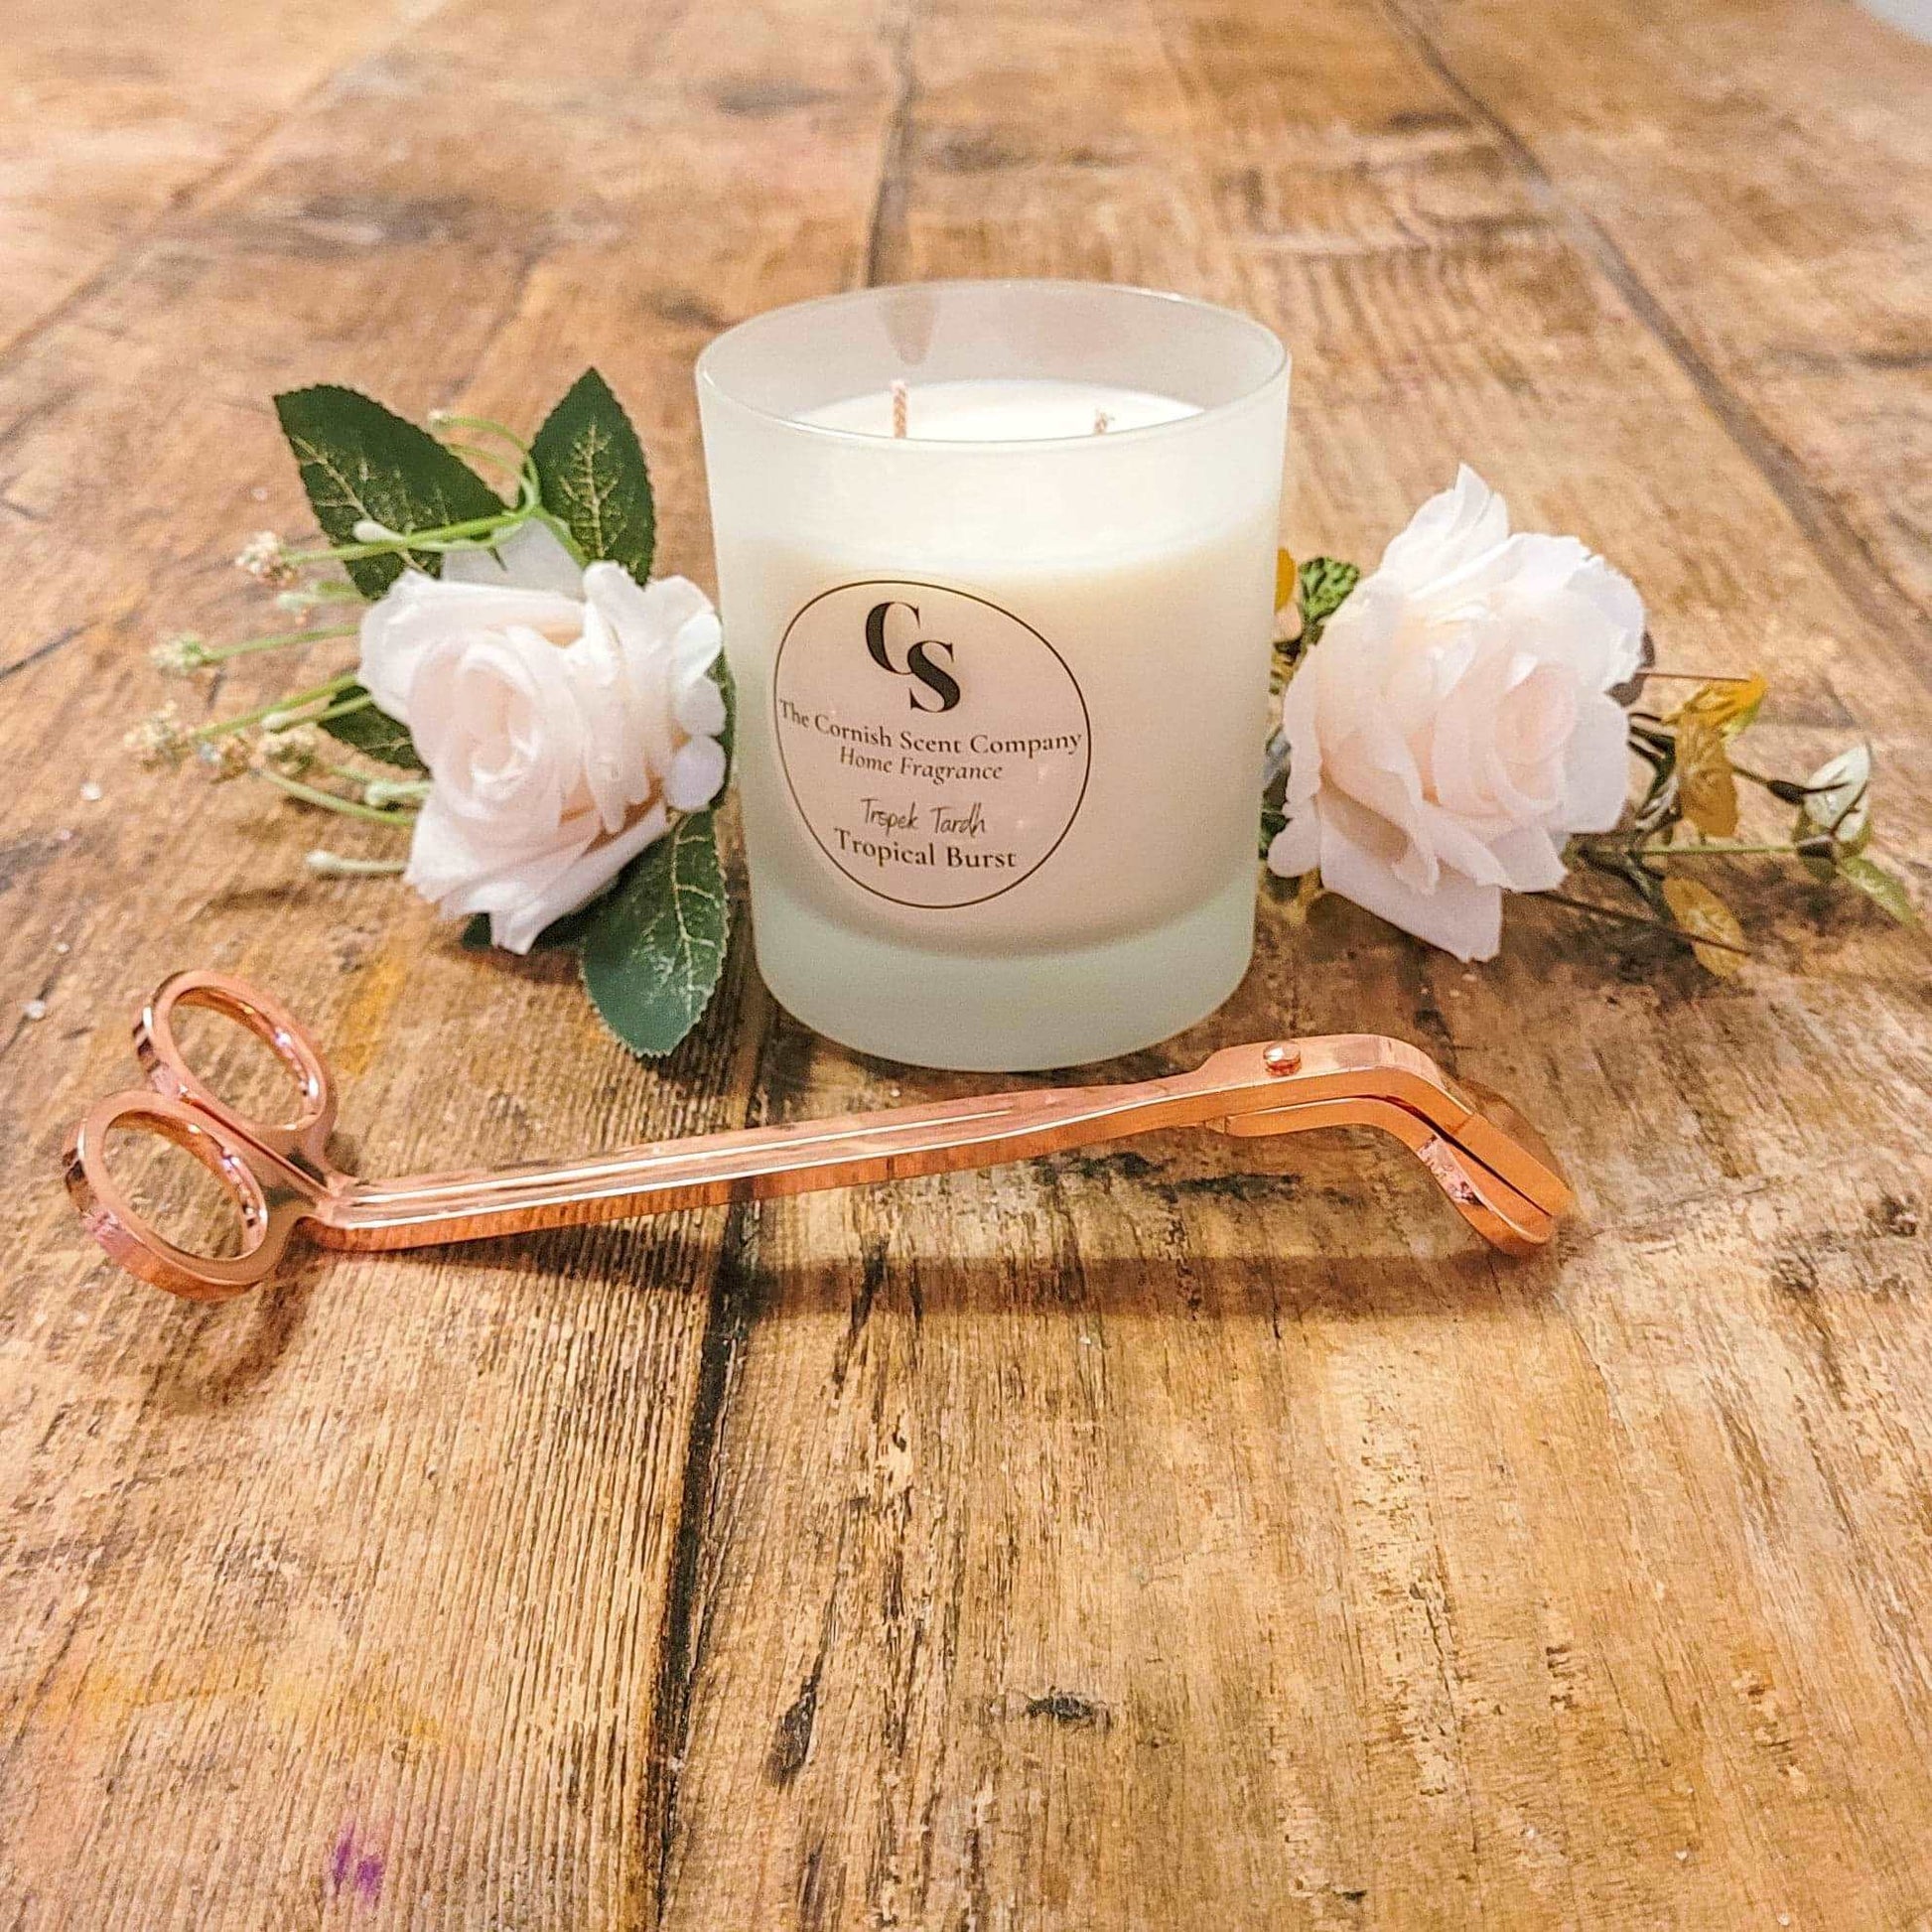 Double Wick Luxury Candles - The Cornish Scent Company